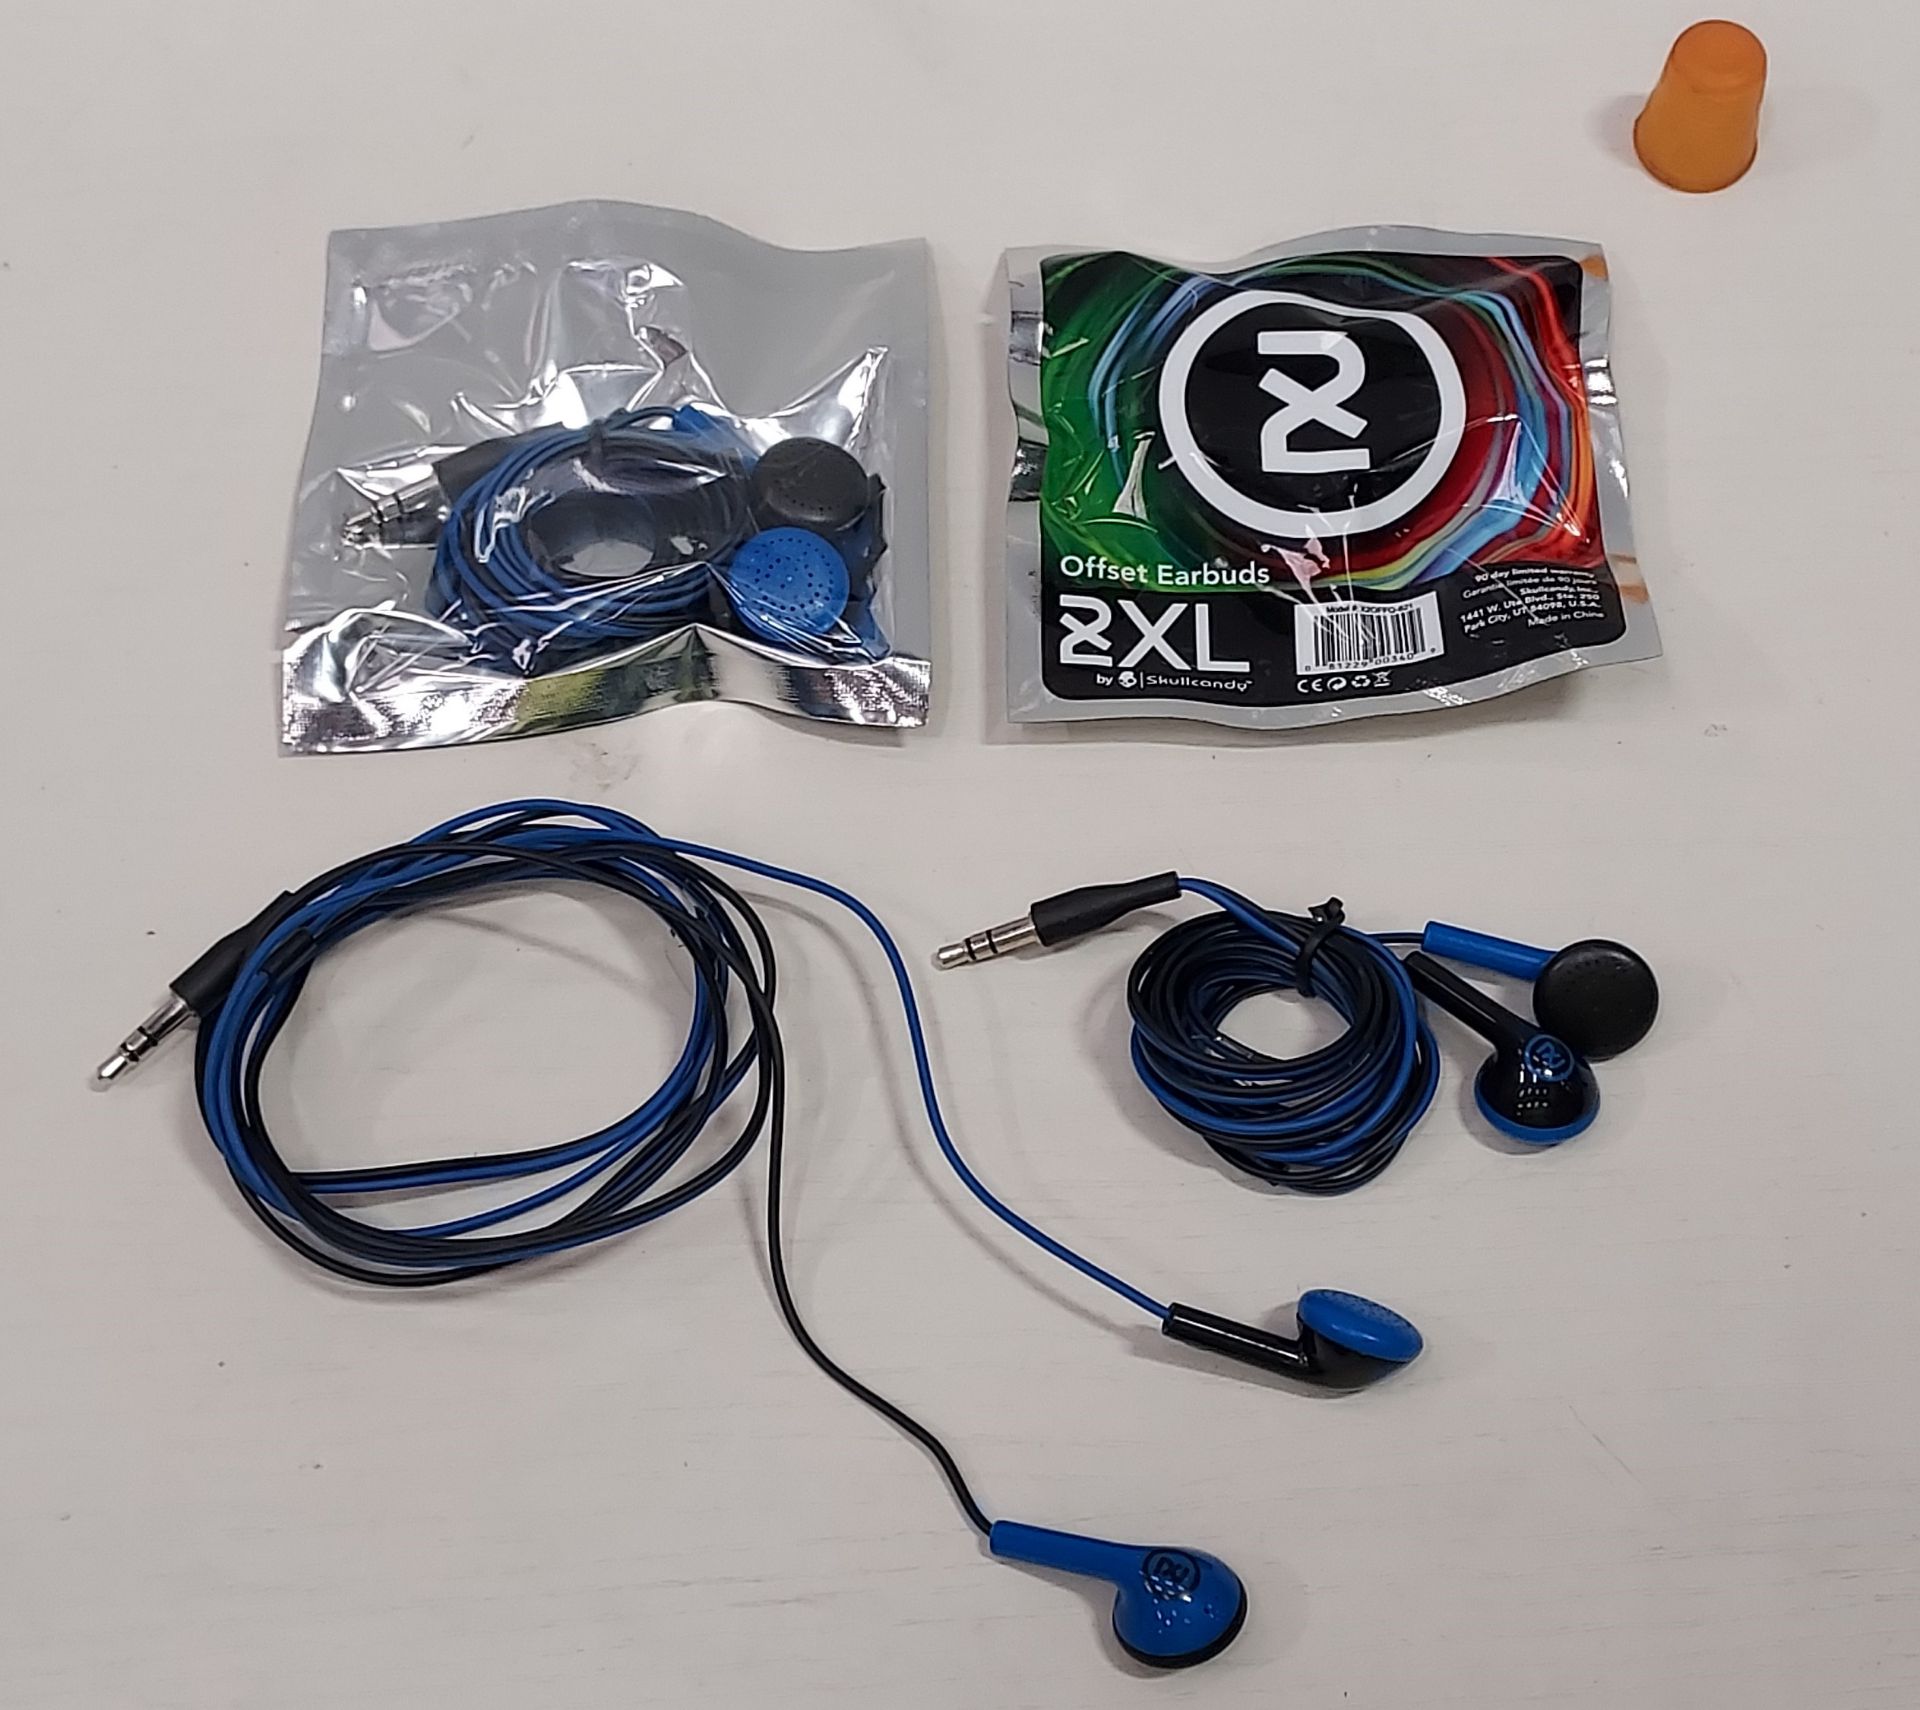 125 X BRAND NEW SKULLCANDY AUX OFFSET EARPHONES IN BLUE AND BLACK ( HALF BOX - PICK LOOSE )